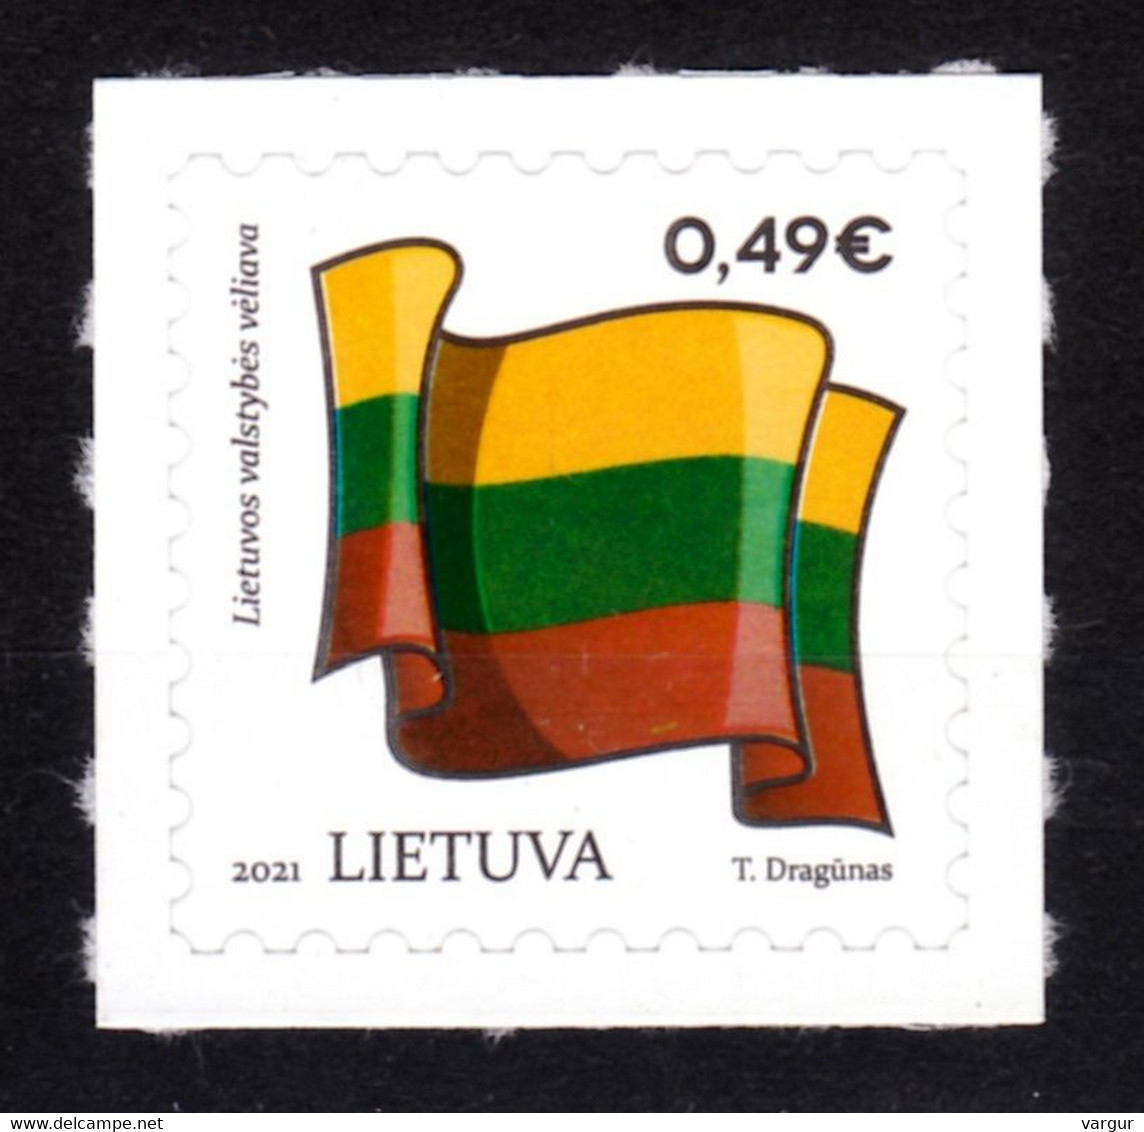 LITHUANIA 2021-12 Definitive: Flag, 49c Re-print With New Date, MINT Adhesive - Sellos